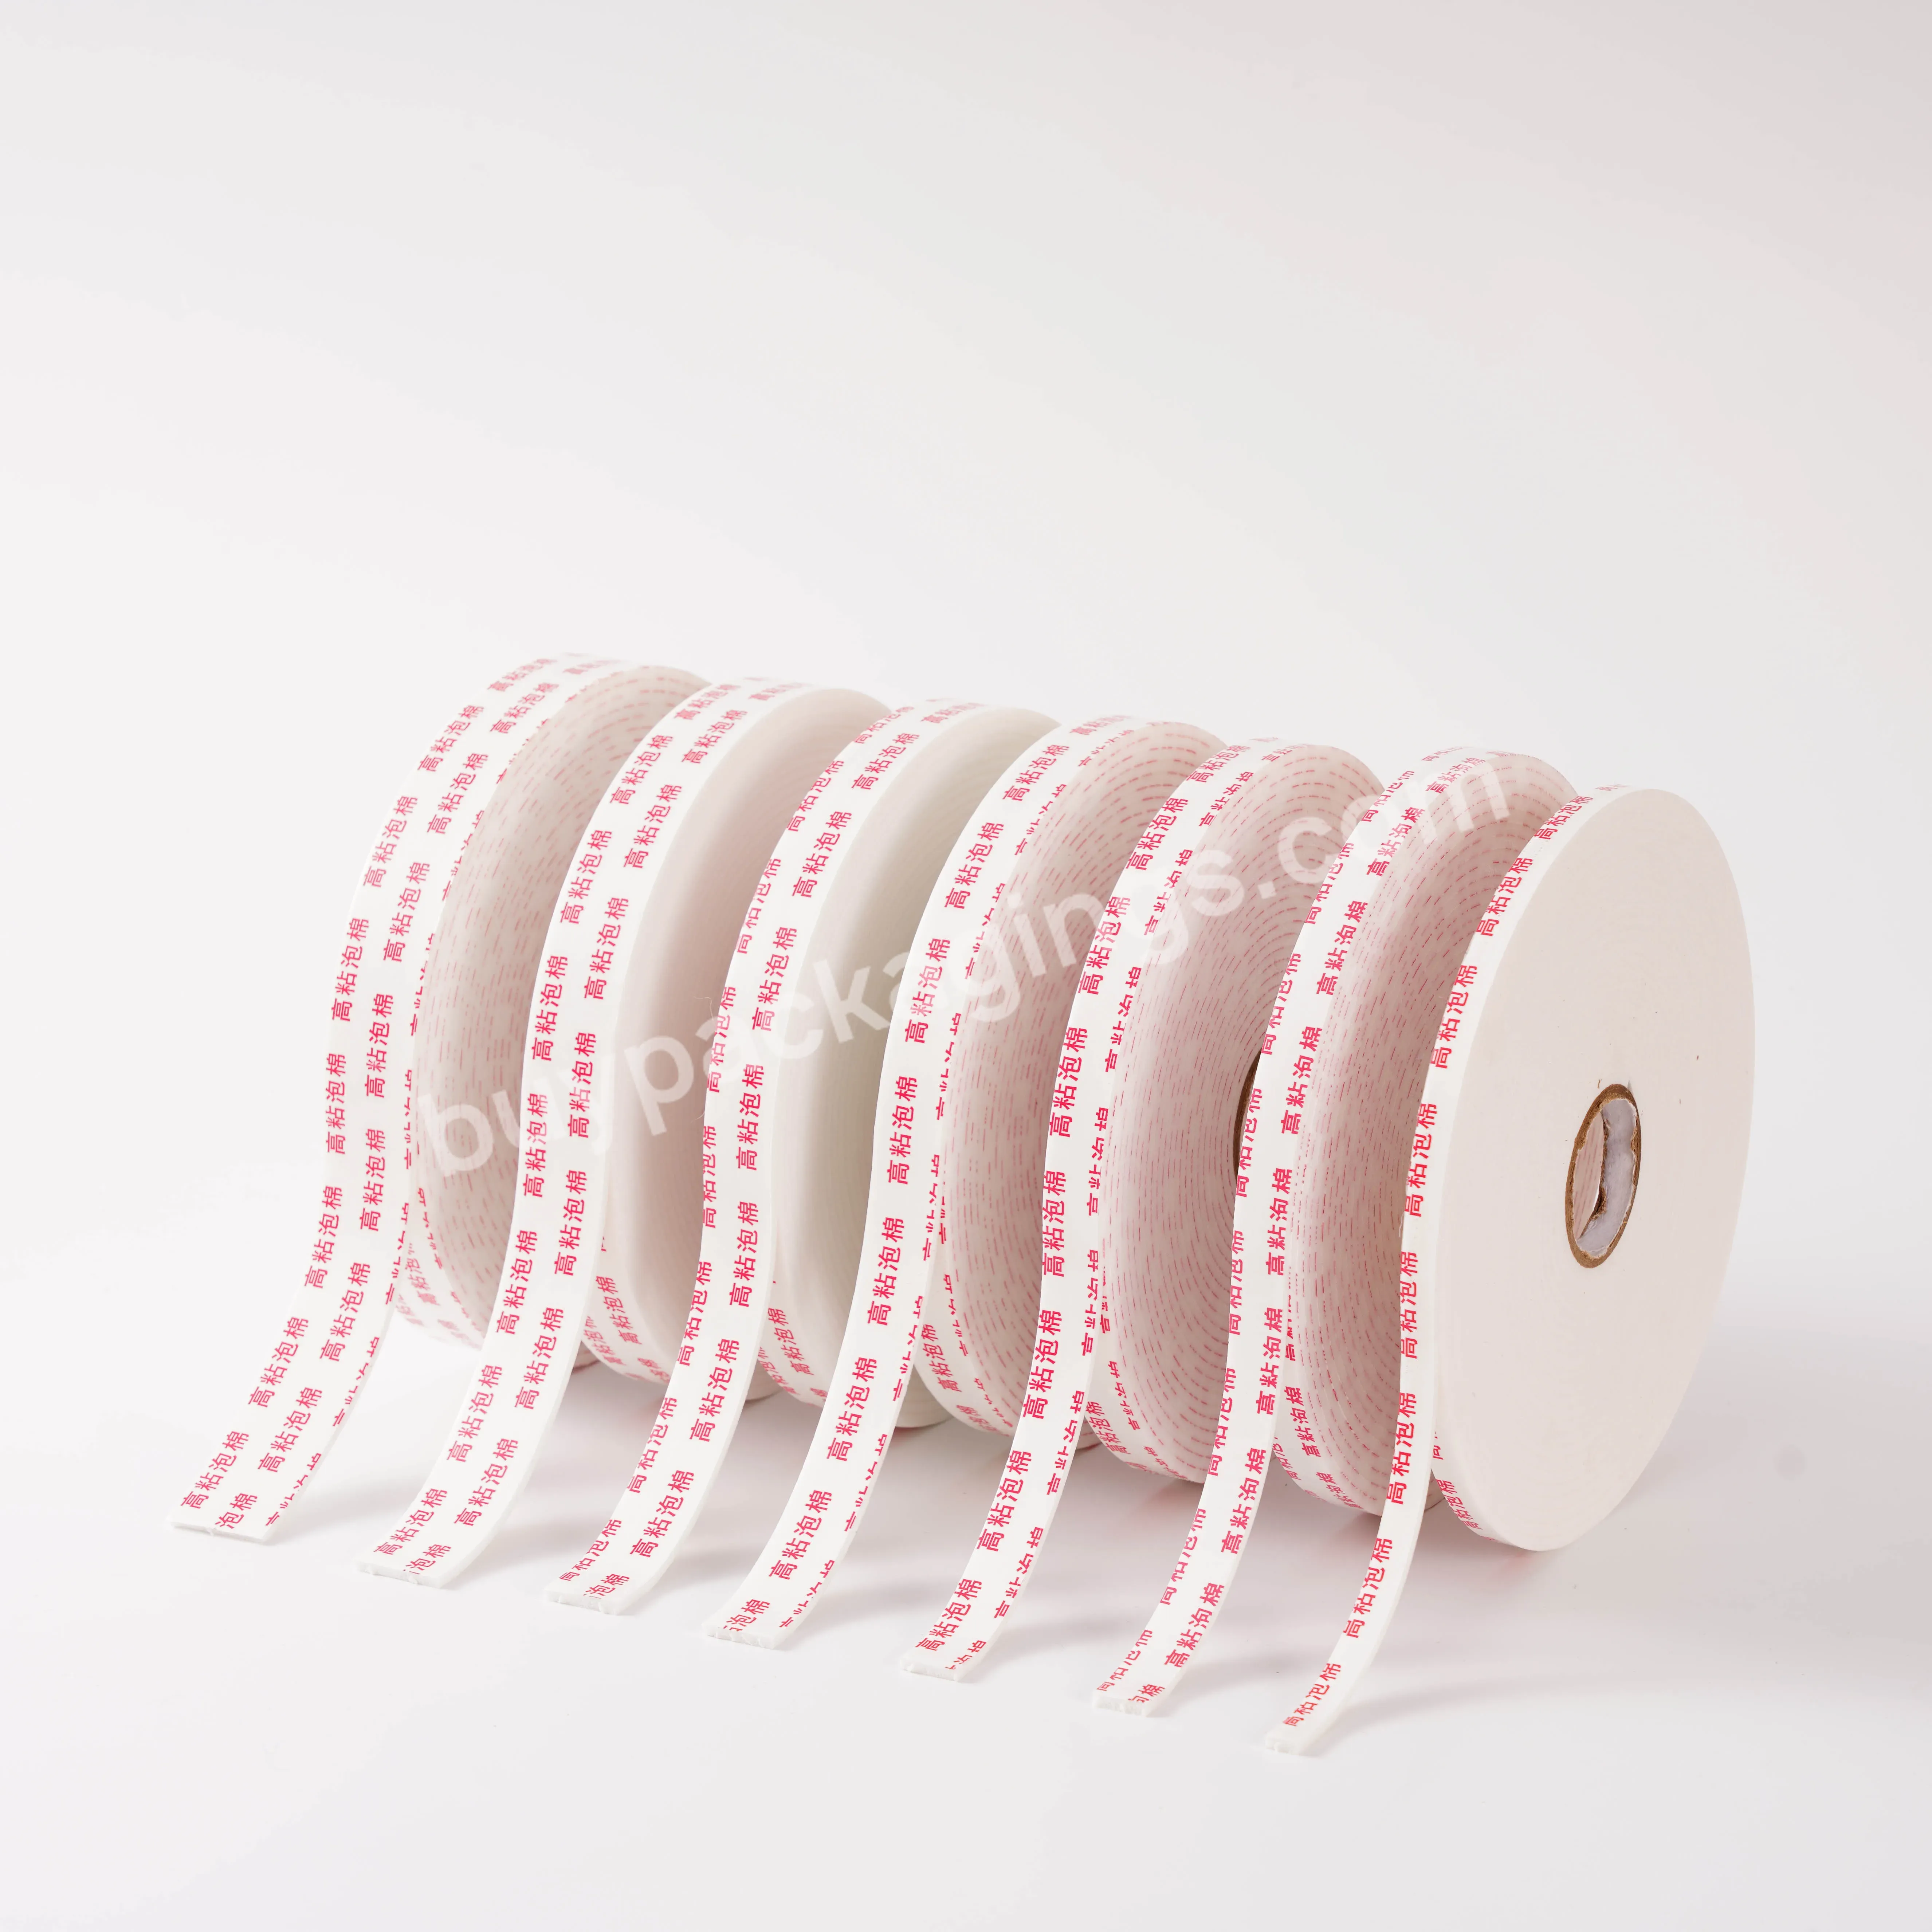 Custom Sized Strong Foam Double Sided Tape For Sealing And Cushioning - Buy Adhesive Double Side Tape Pe Foam,Sealing Double-side Tape,Adhesive Double-sided Cotton Tape.